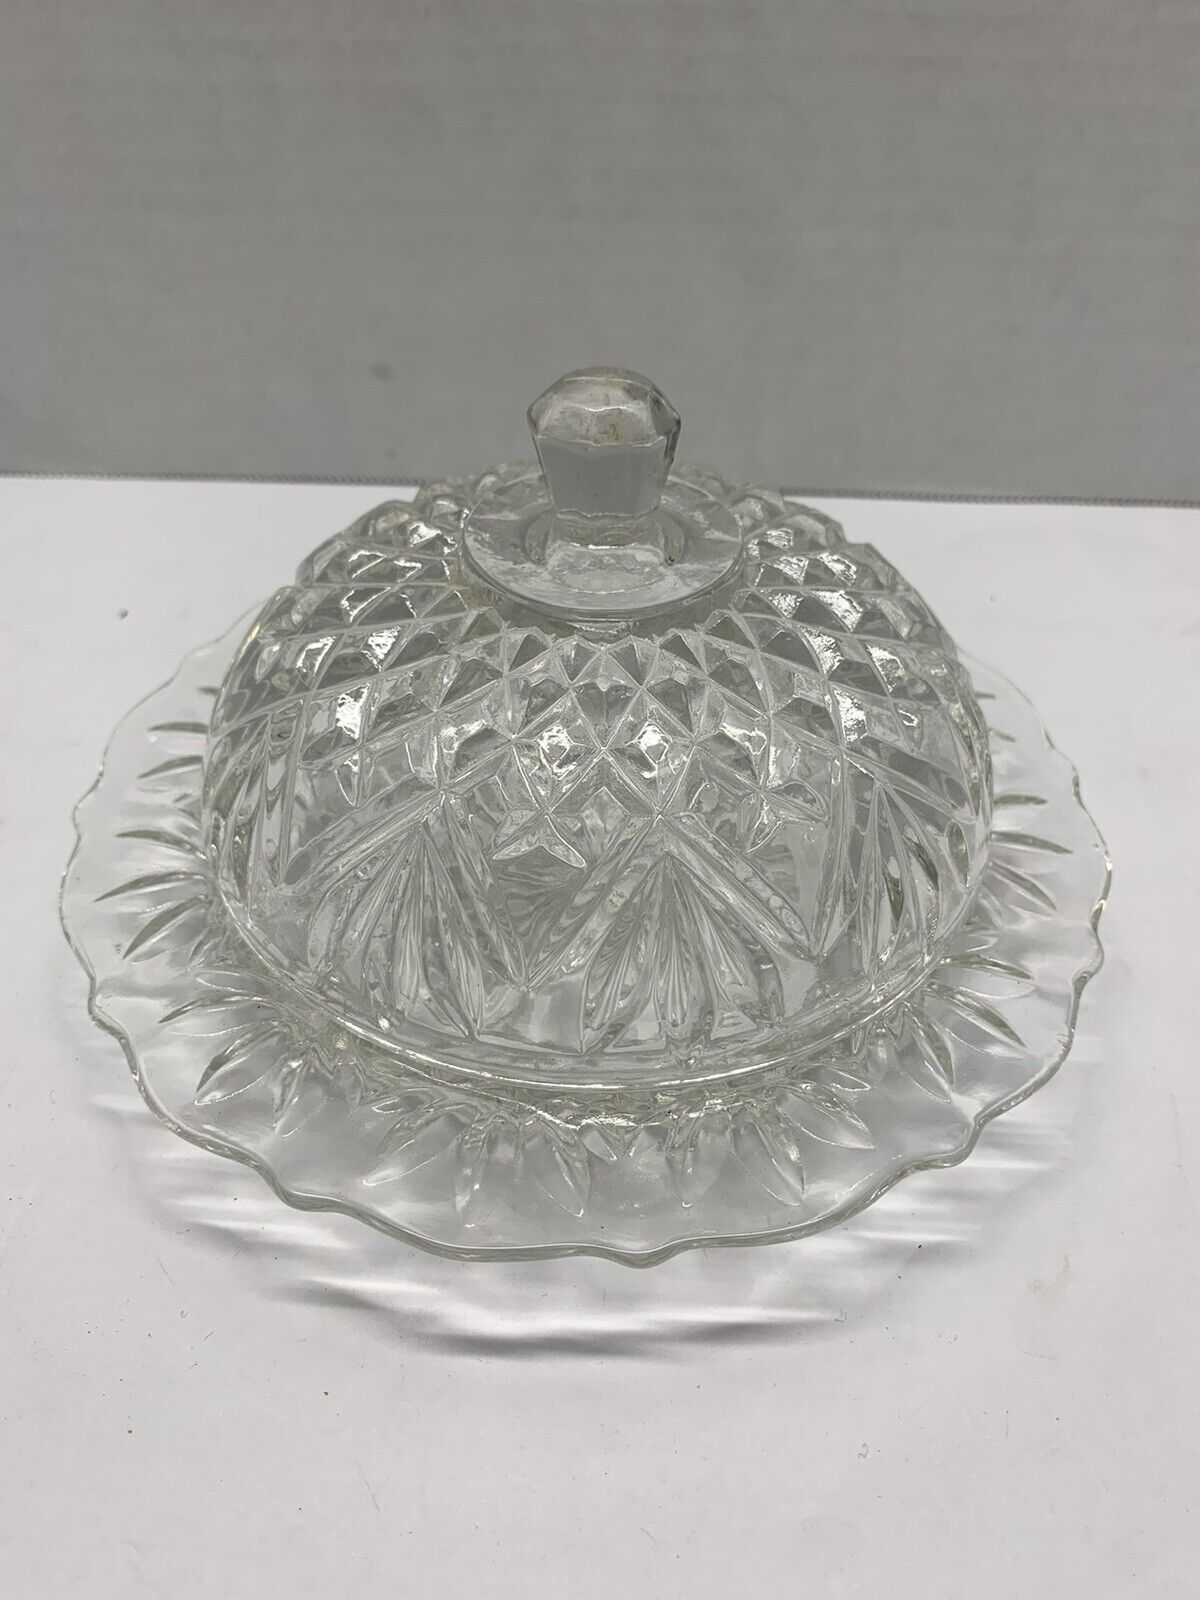 BEAUTIFUL Vintage Round Cut Glass Butter/ Cheese Dish with Domed Lid - LOOK